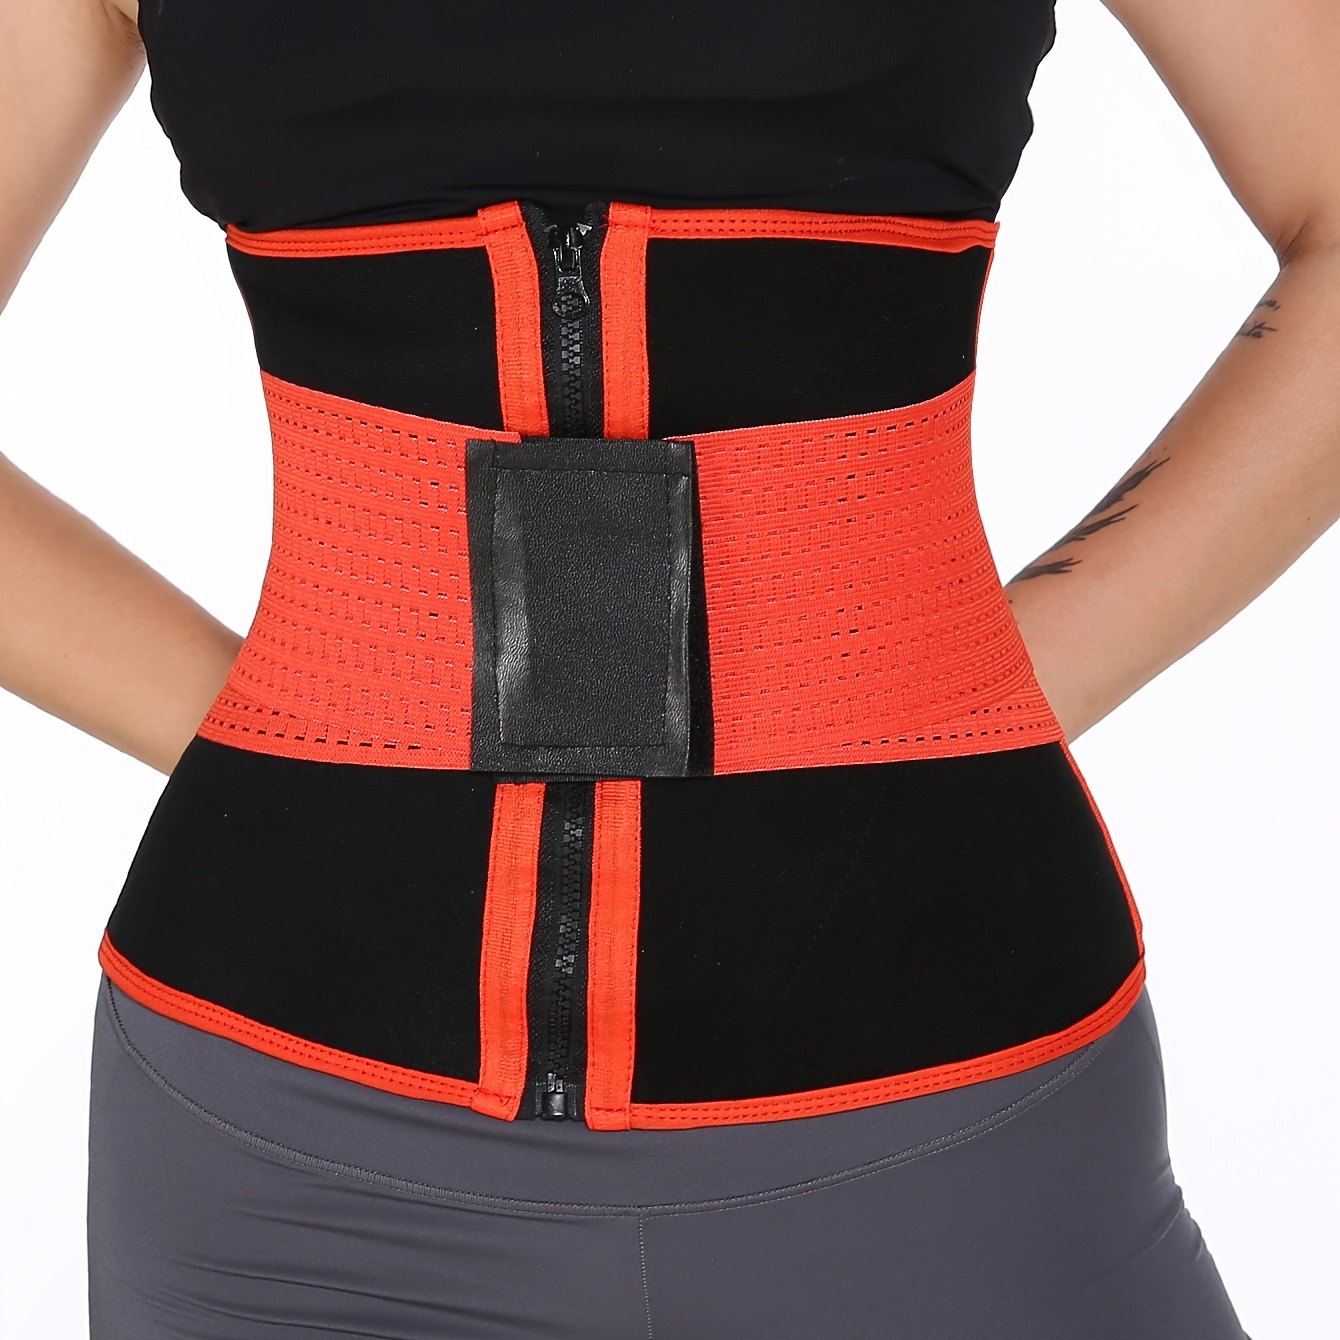 Miss Belt Adjustable Waist Trainer Hourglass Shaper in Surulere - Clothing  Accessories, Omo Lady